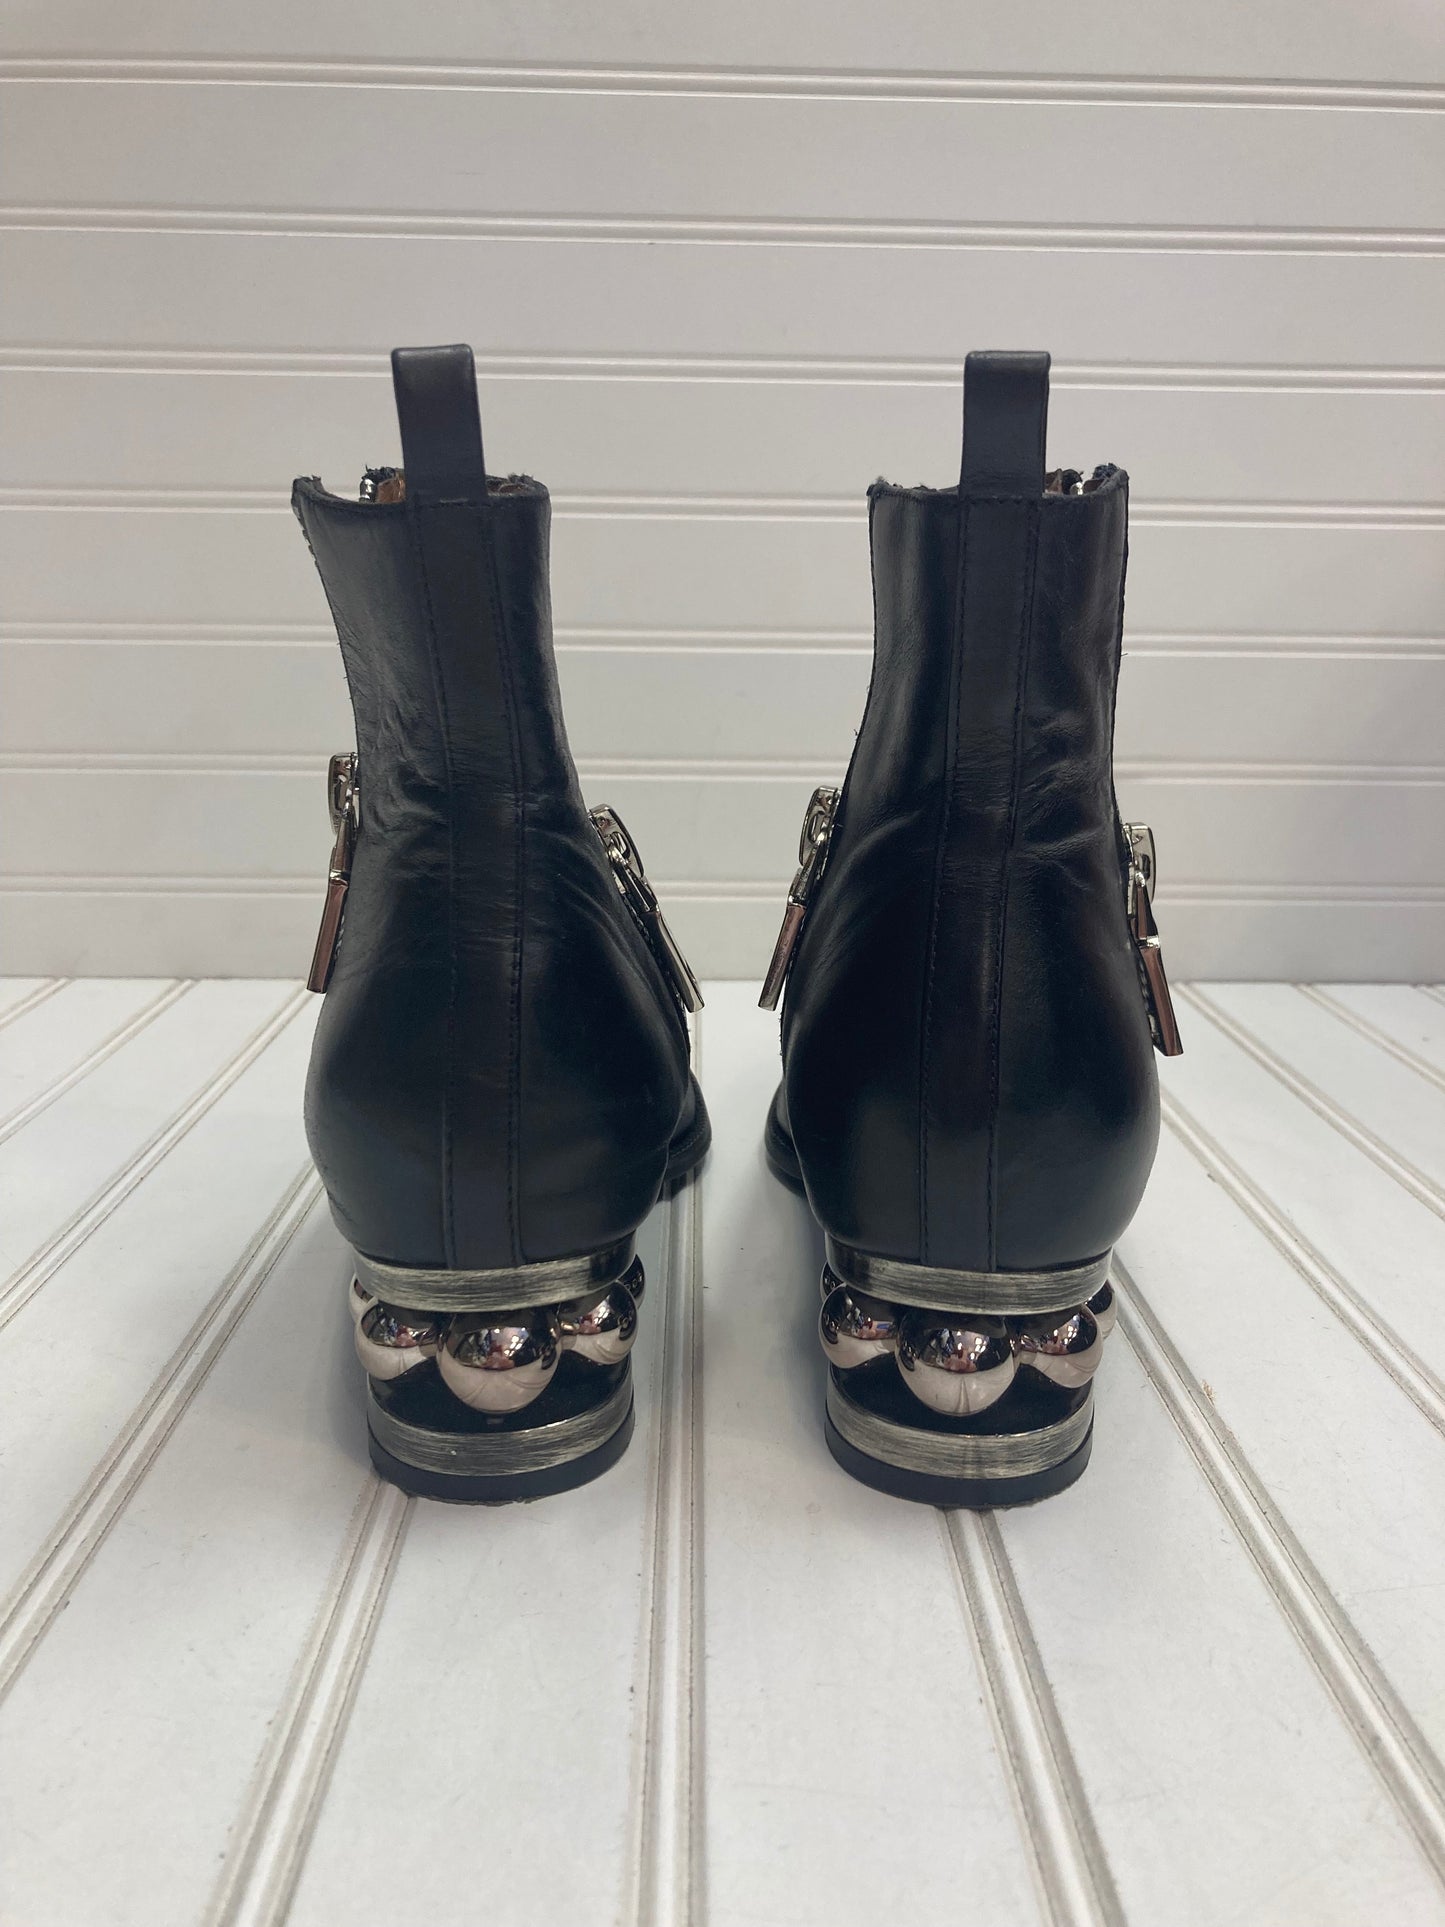 Black & Silver Boots Ankle Heels Jeffery Campbell, Size 9.5